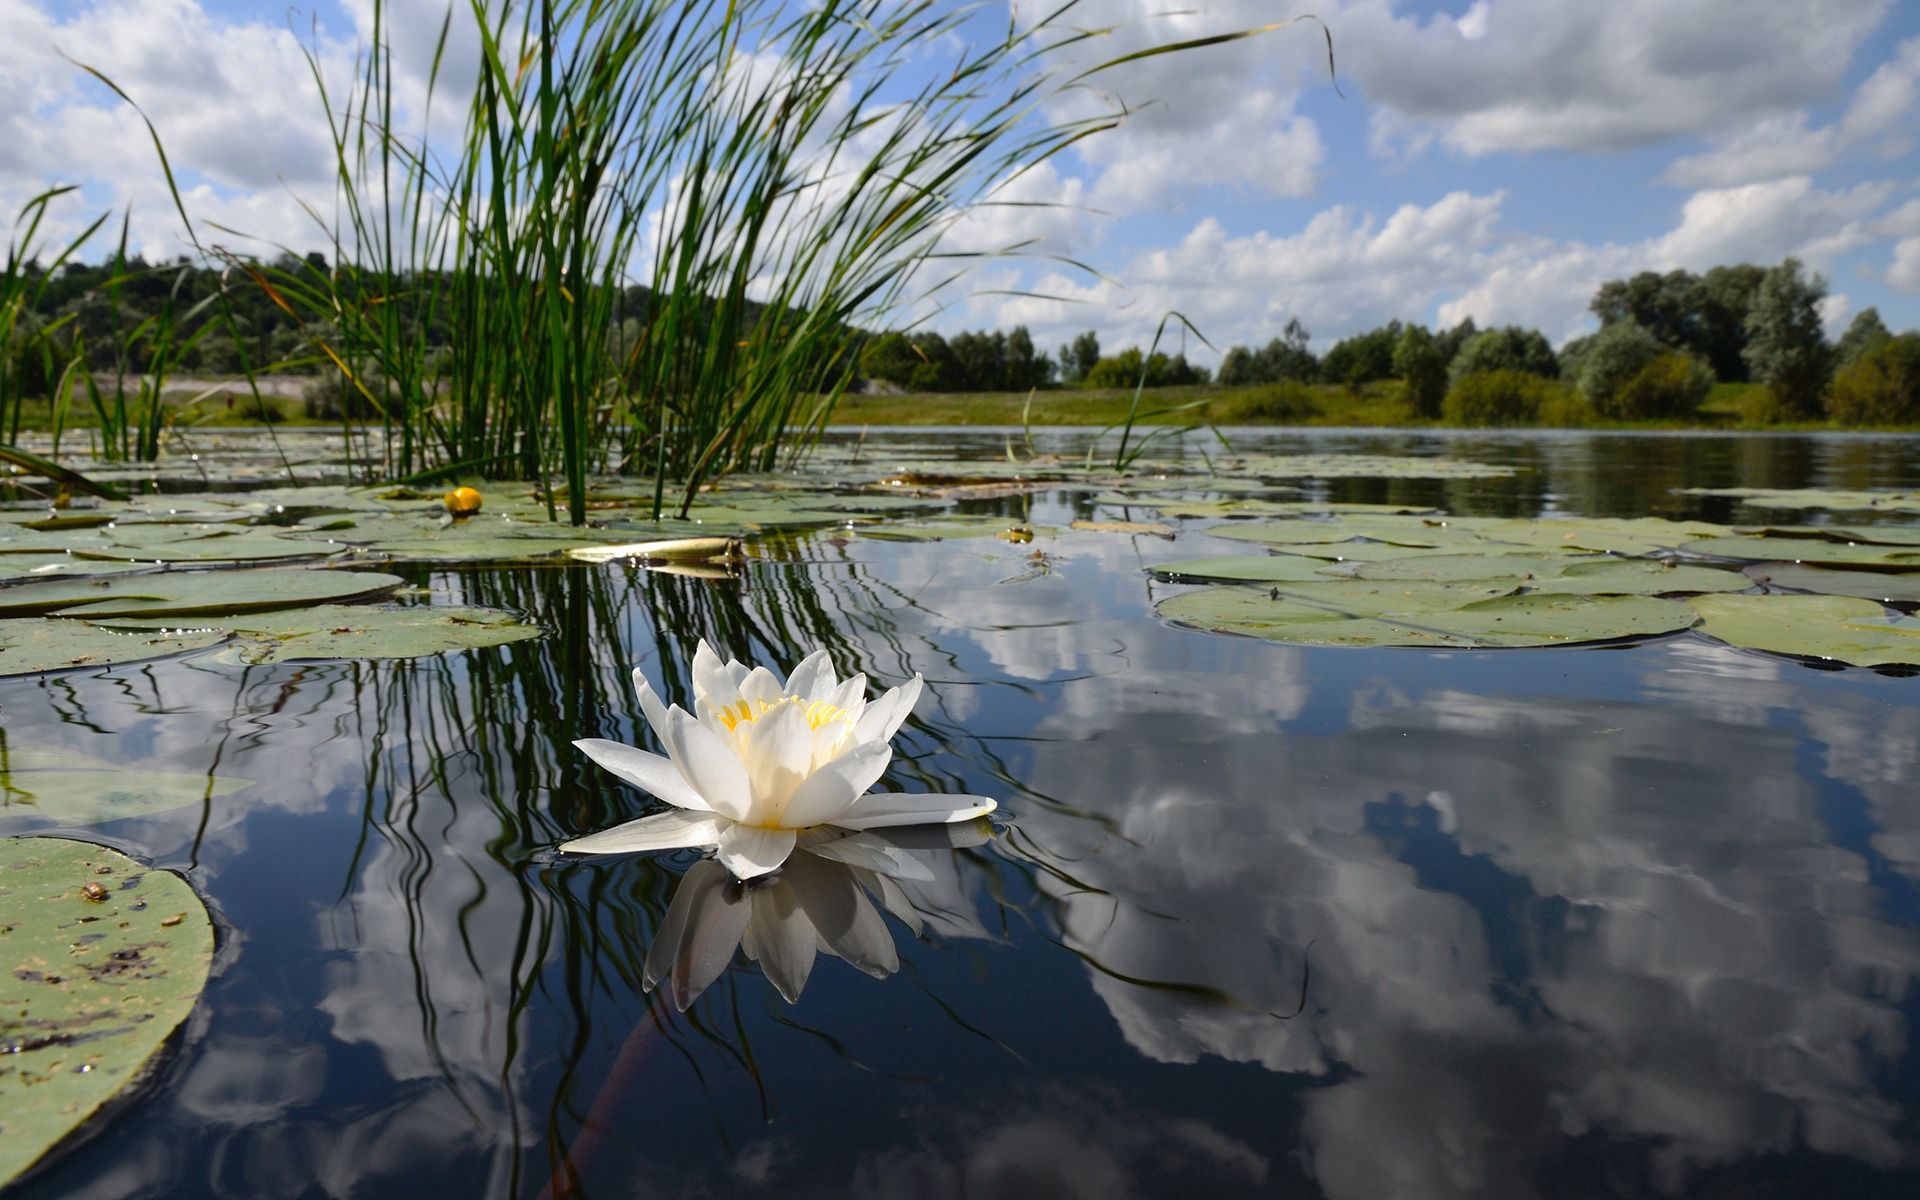 lake, reflection, water lily, nature, flower, clouds, lily, mirror wallpaper for mobile